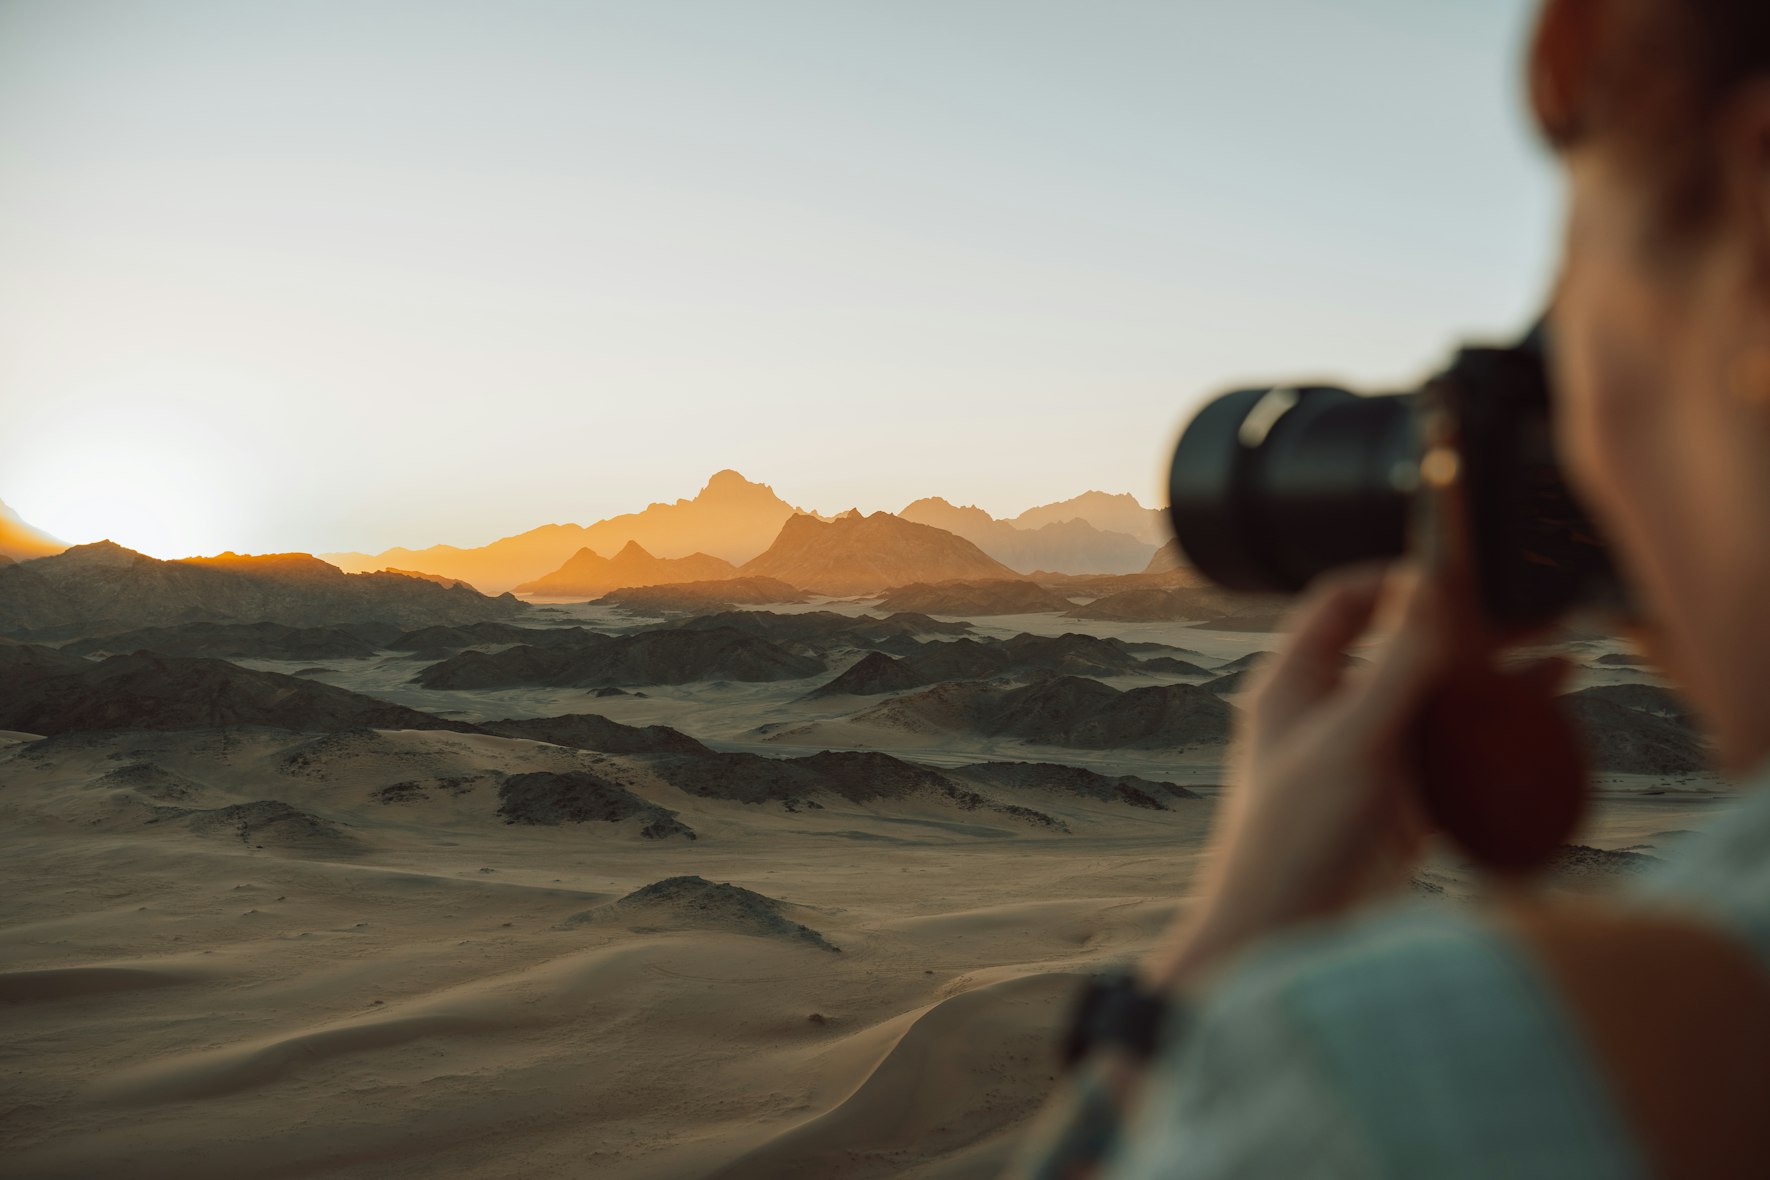 A person taking photos in the desert